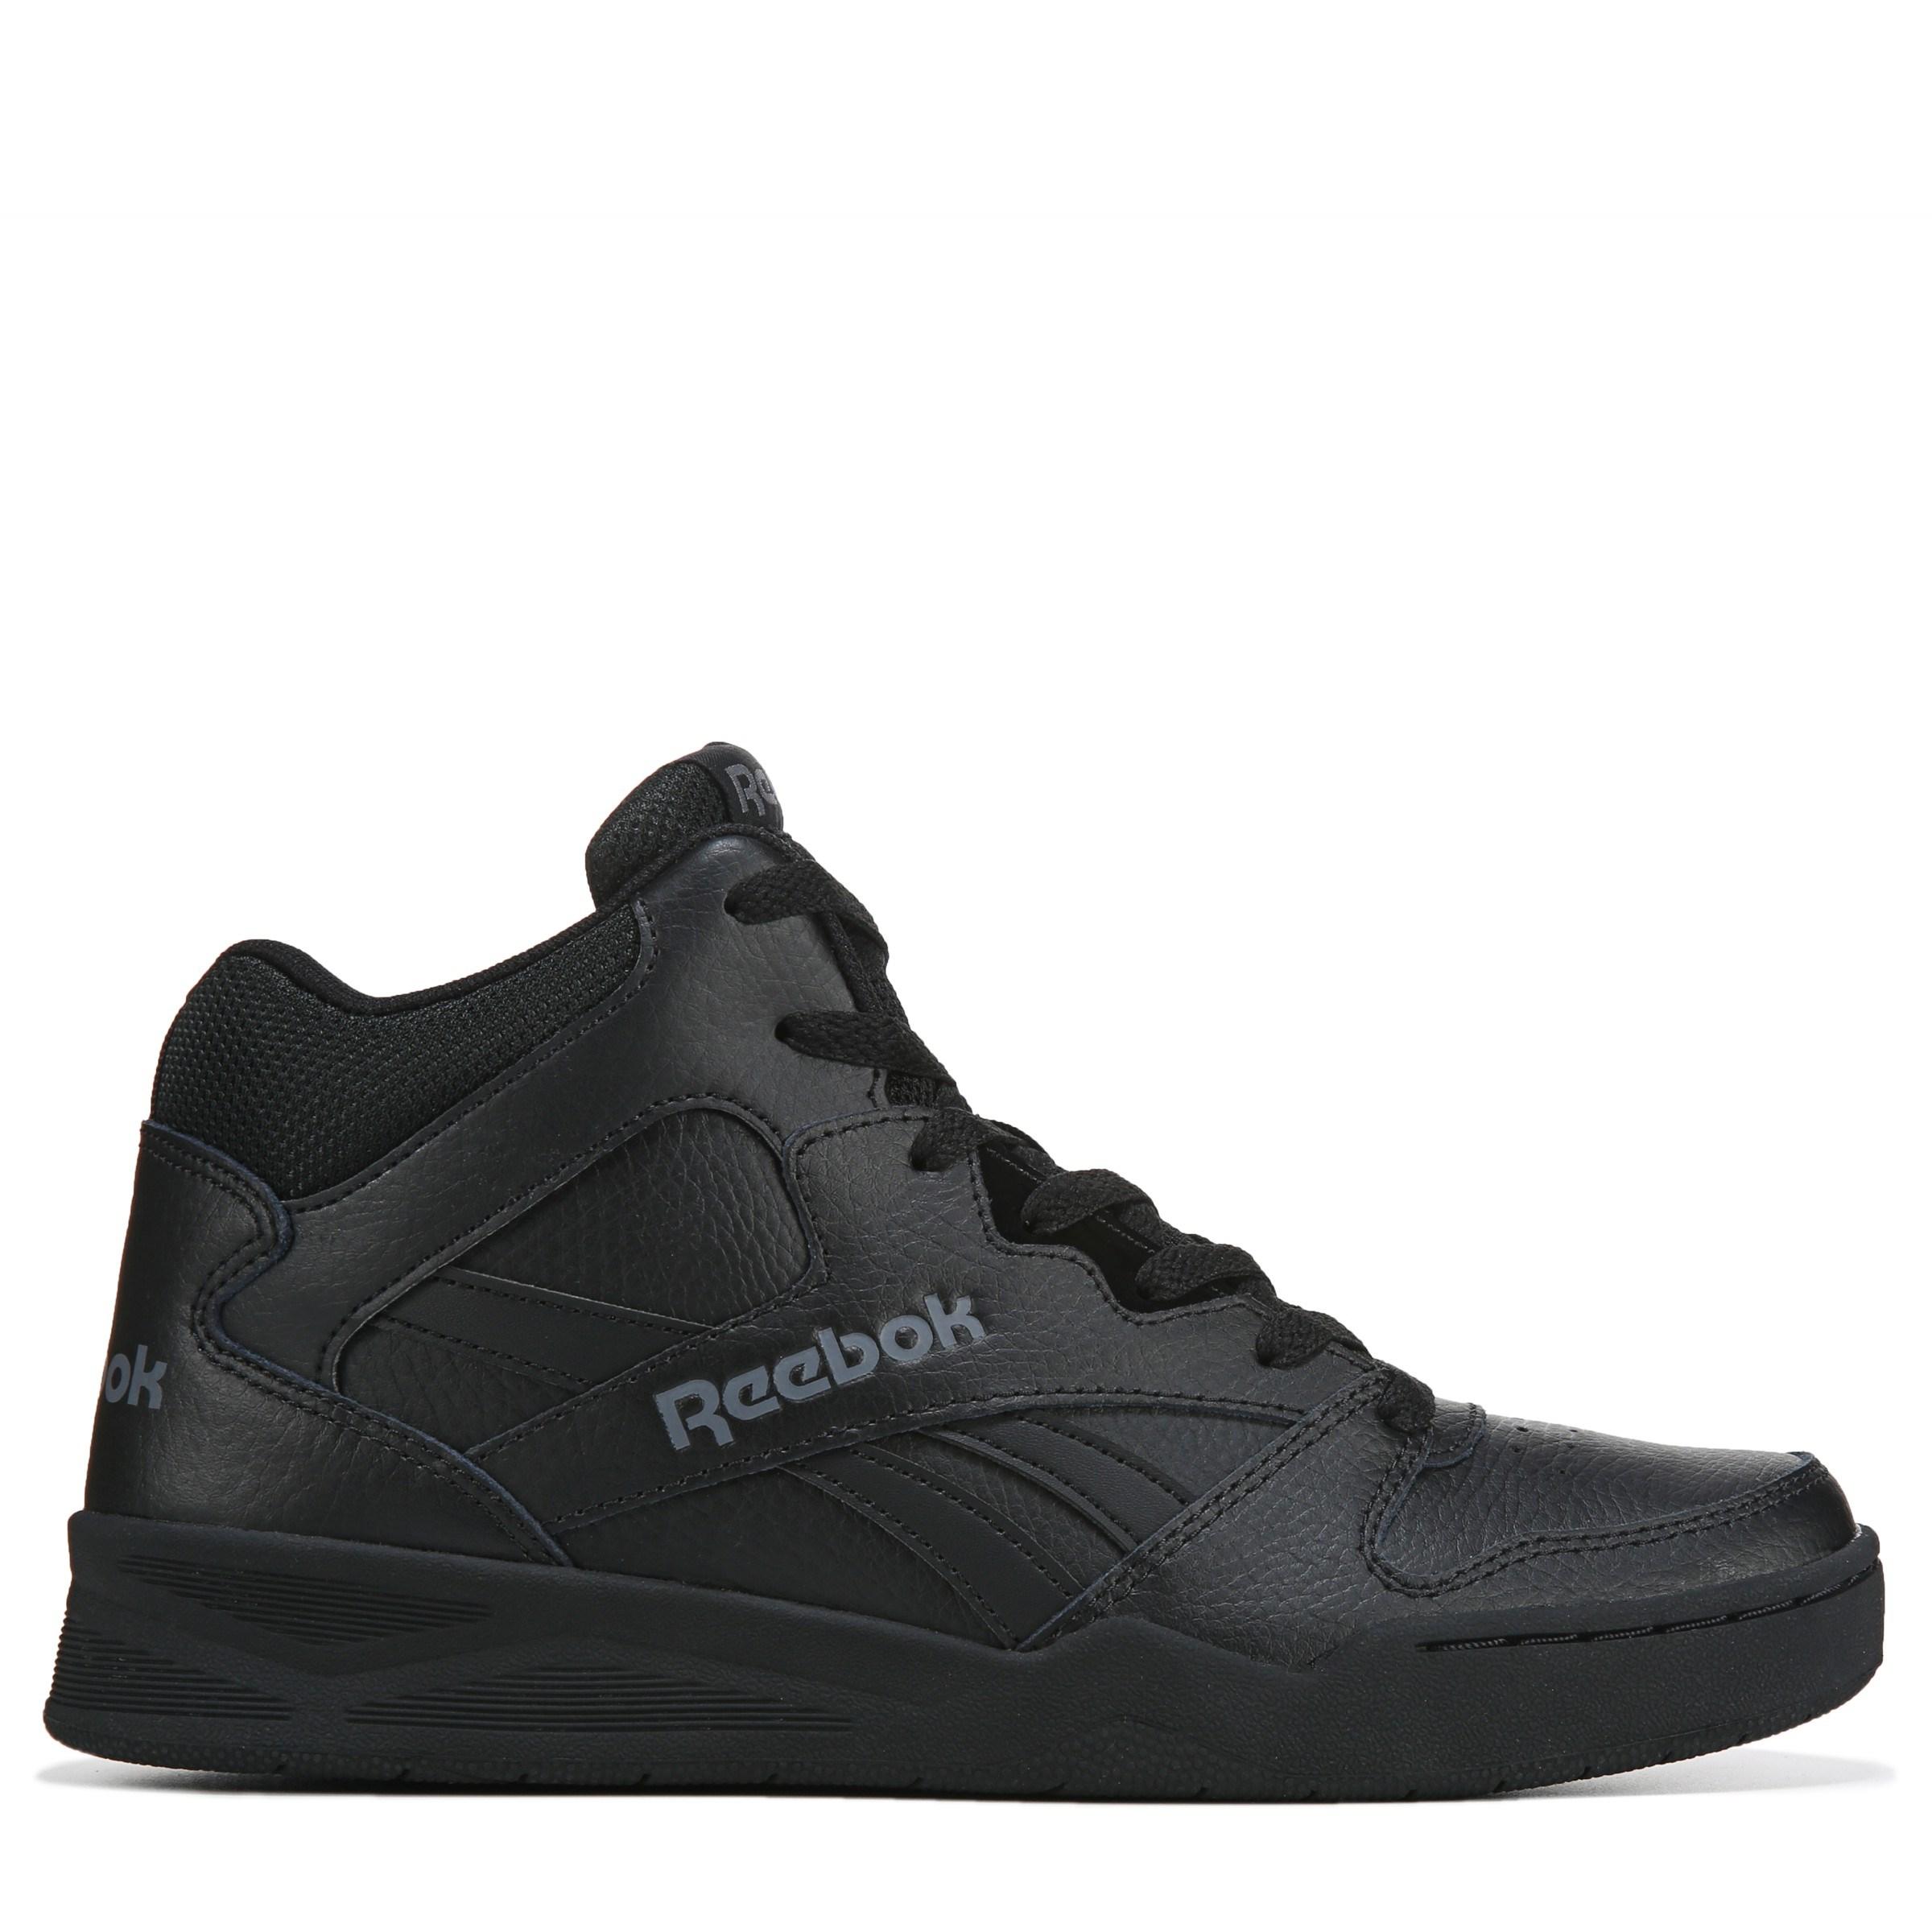 Reebok Leather Bb4500 High Top Sneakers in Black for Men - Lyst